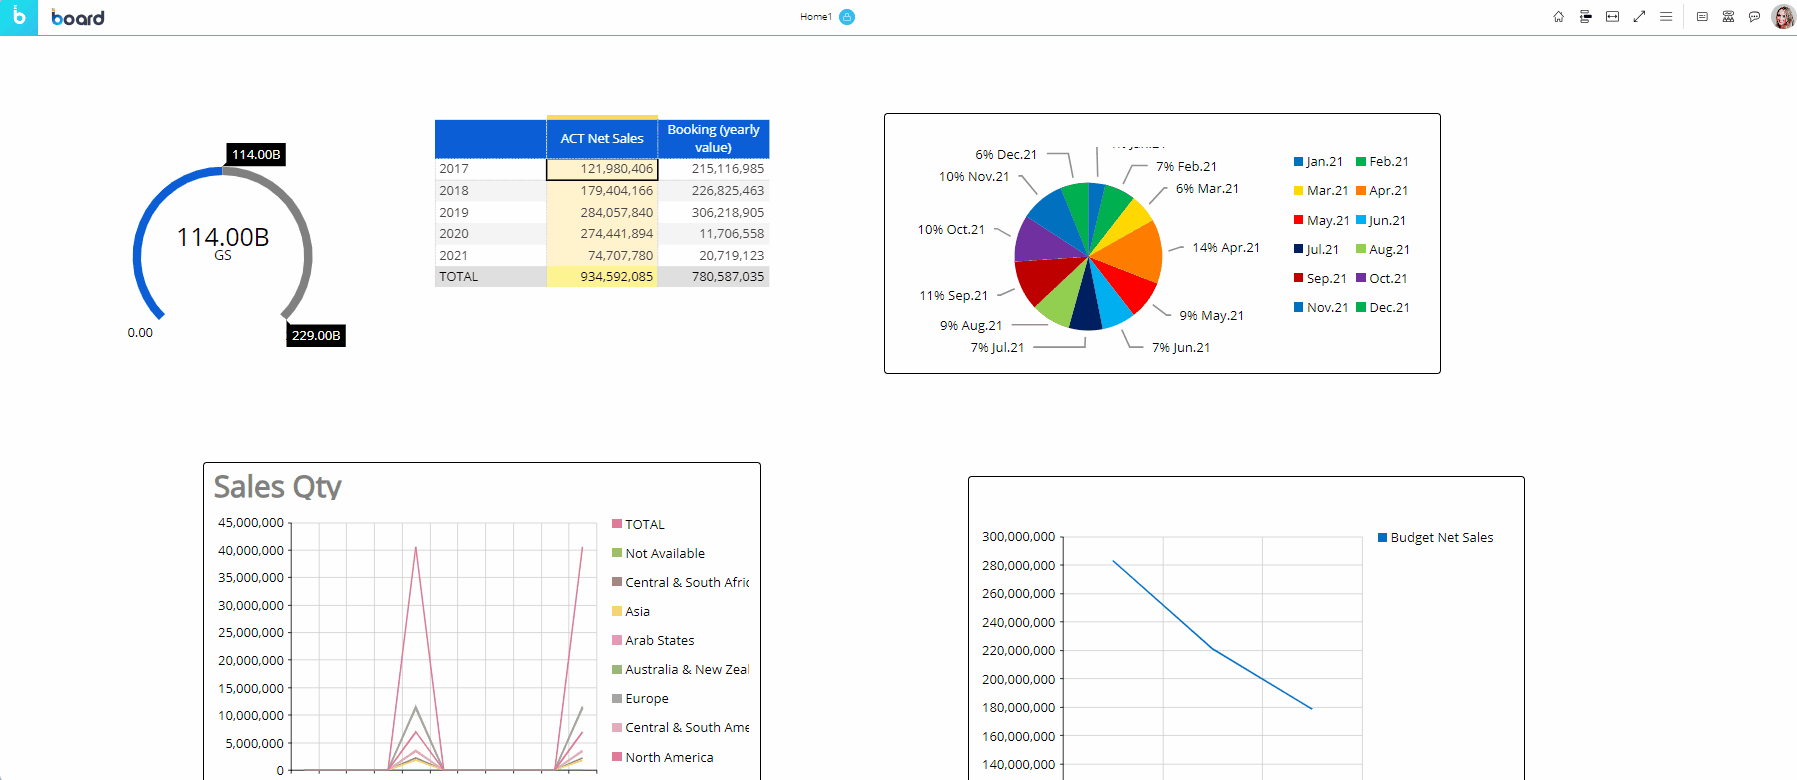 contents/assets/images/interacting with charts.gif